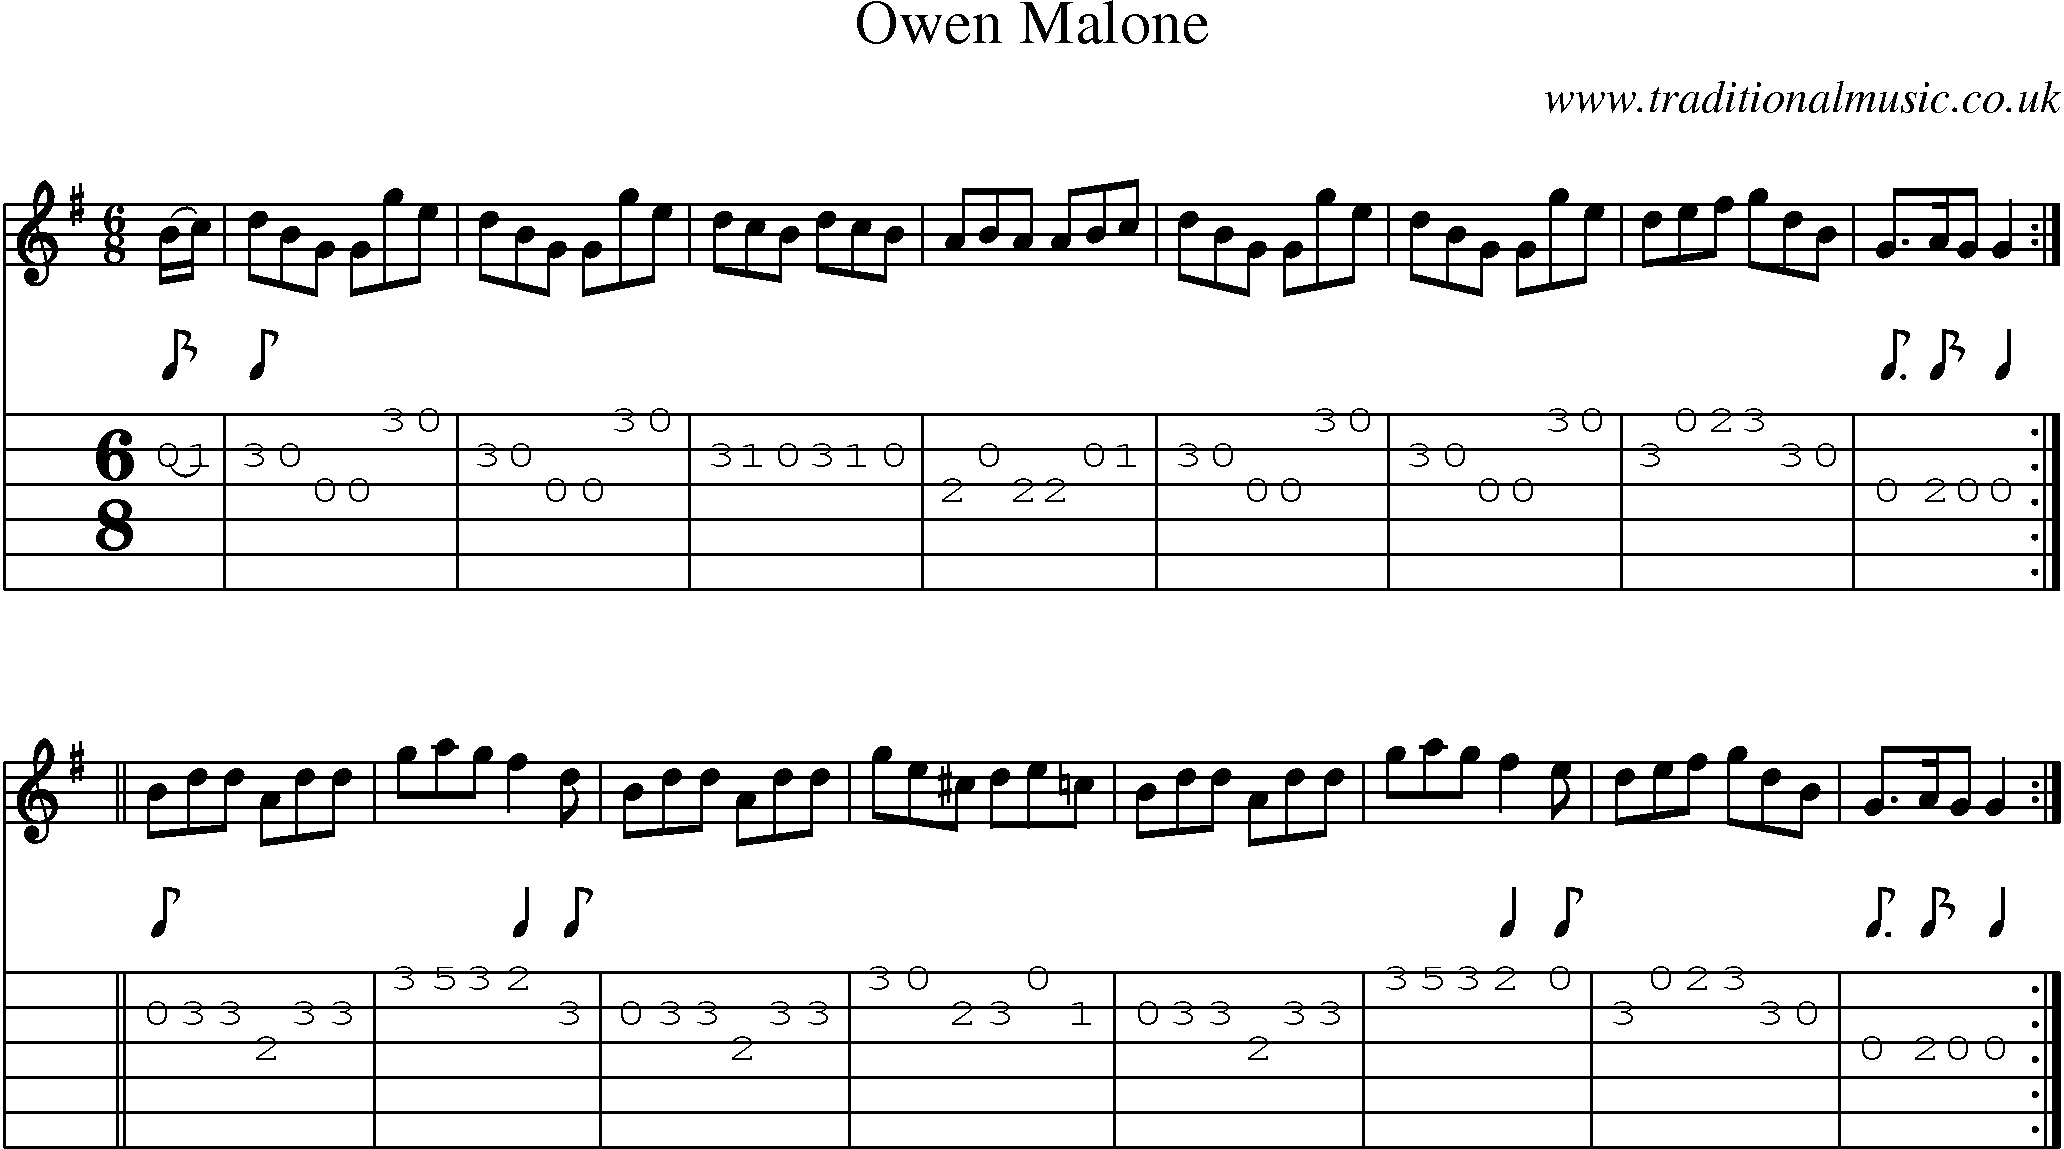 Music Score and Guitar Tabs for Owen Malone